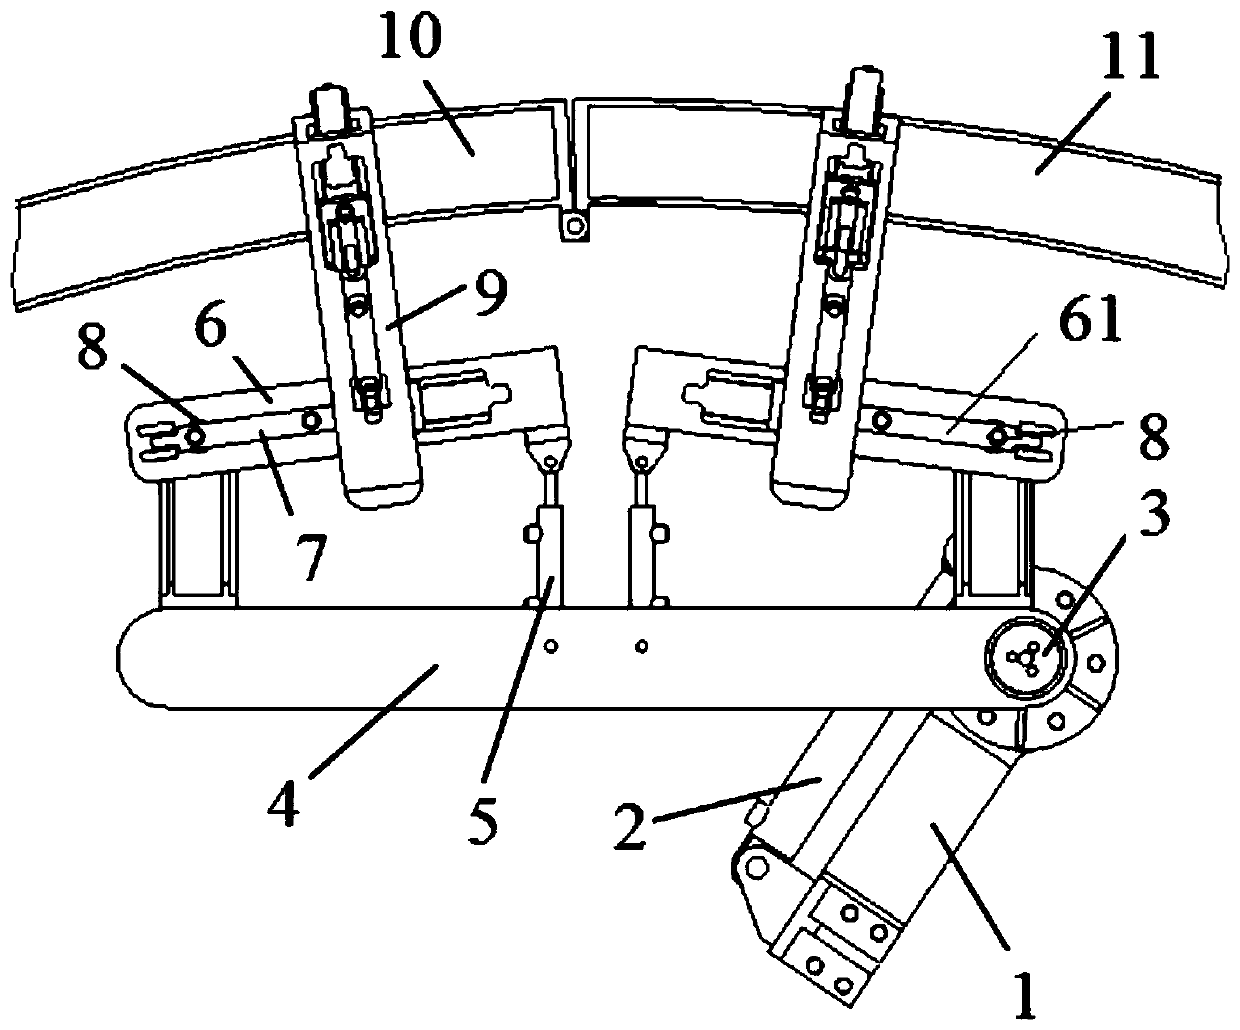 Butt joint device